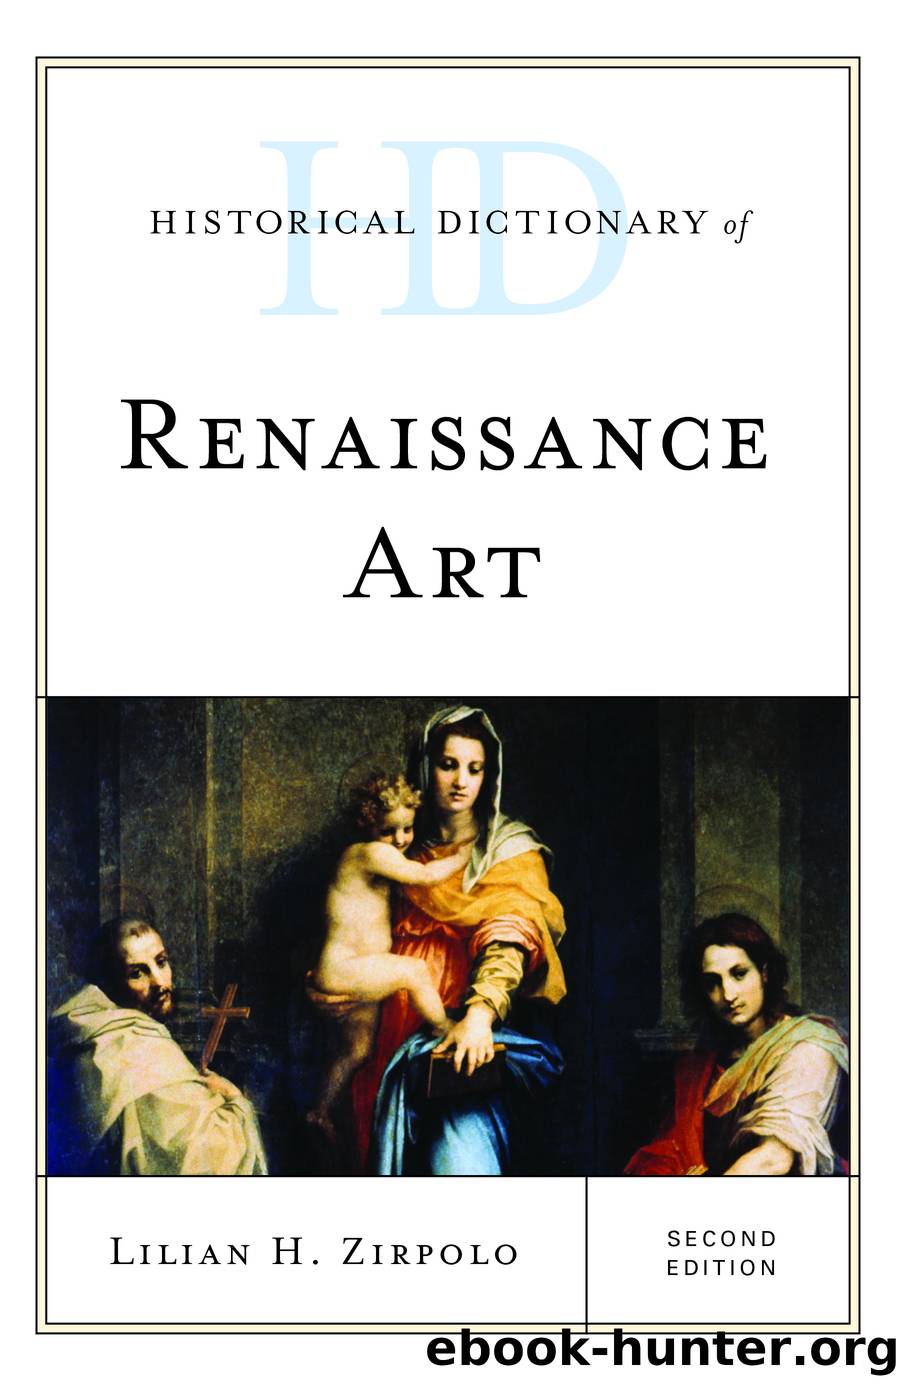 Historical Dictionary of Renaissance Art by Lilian H. Zirpolo